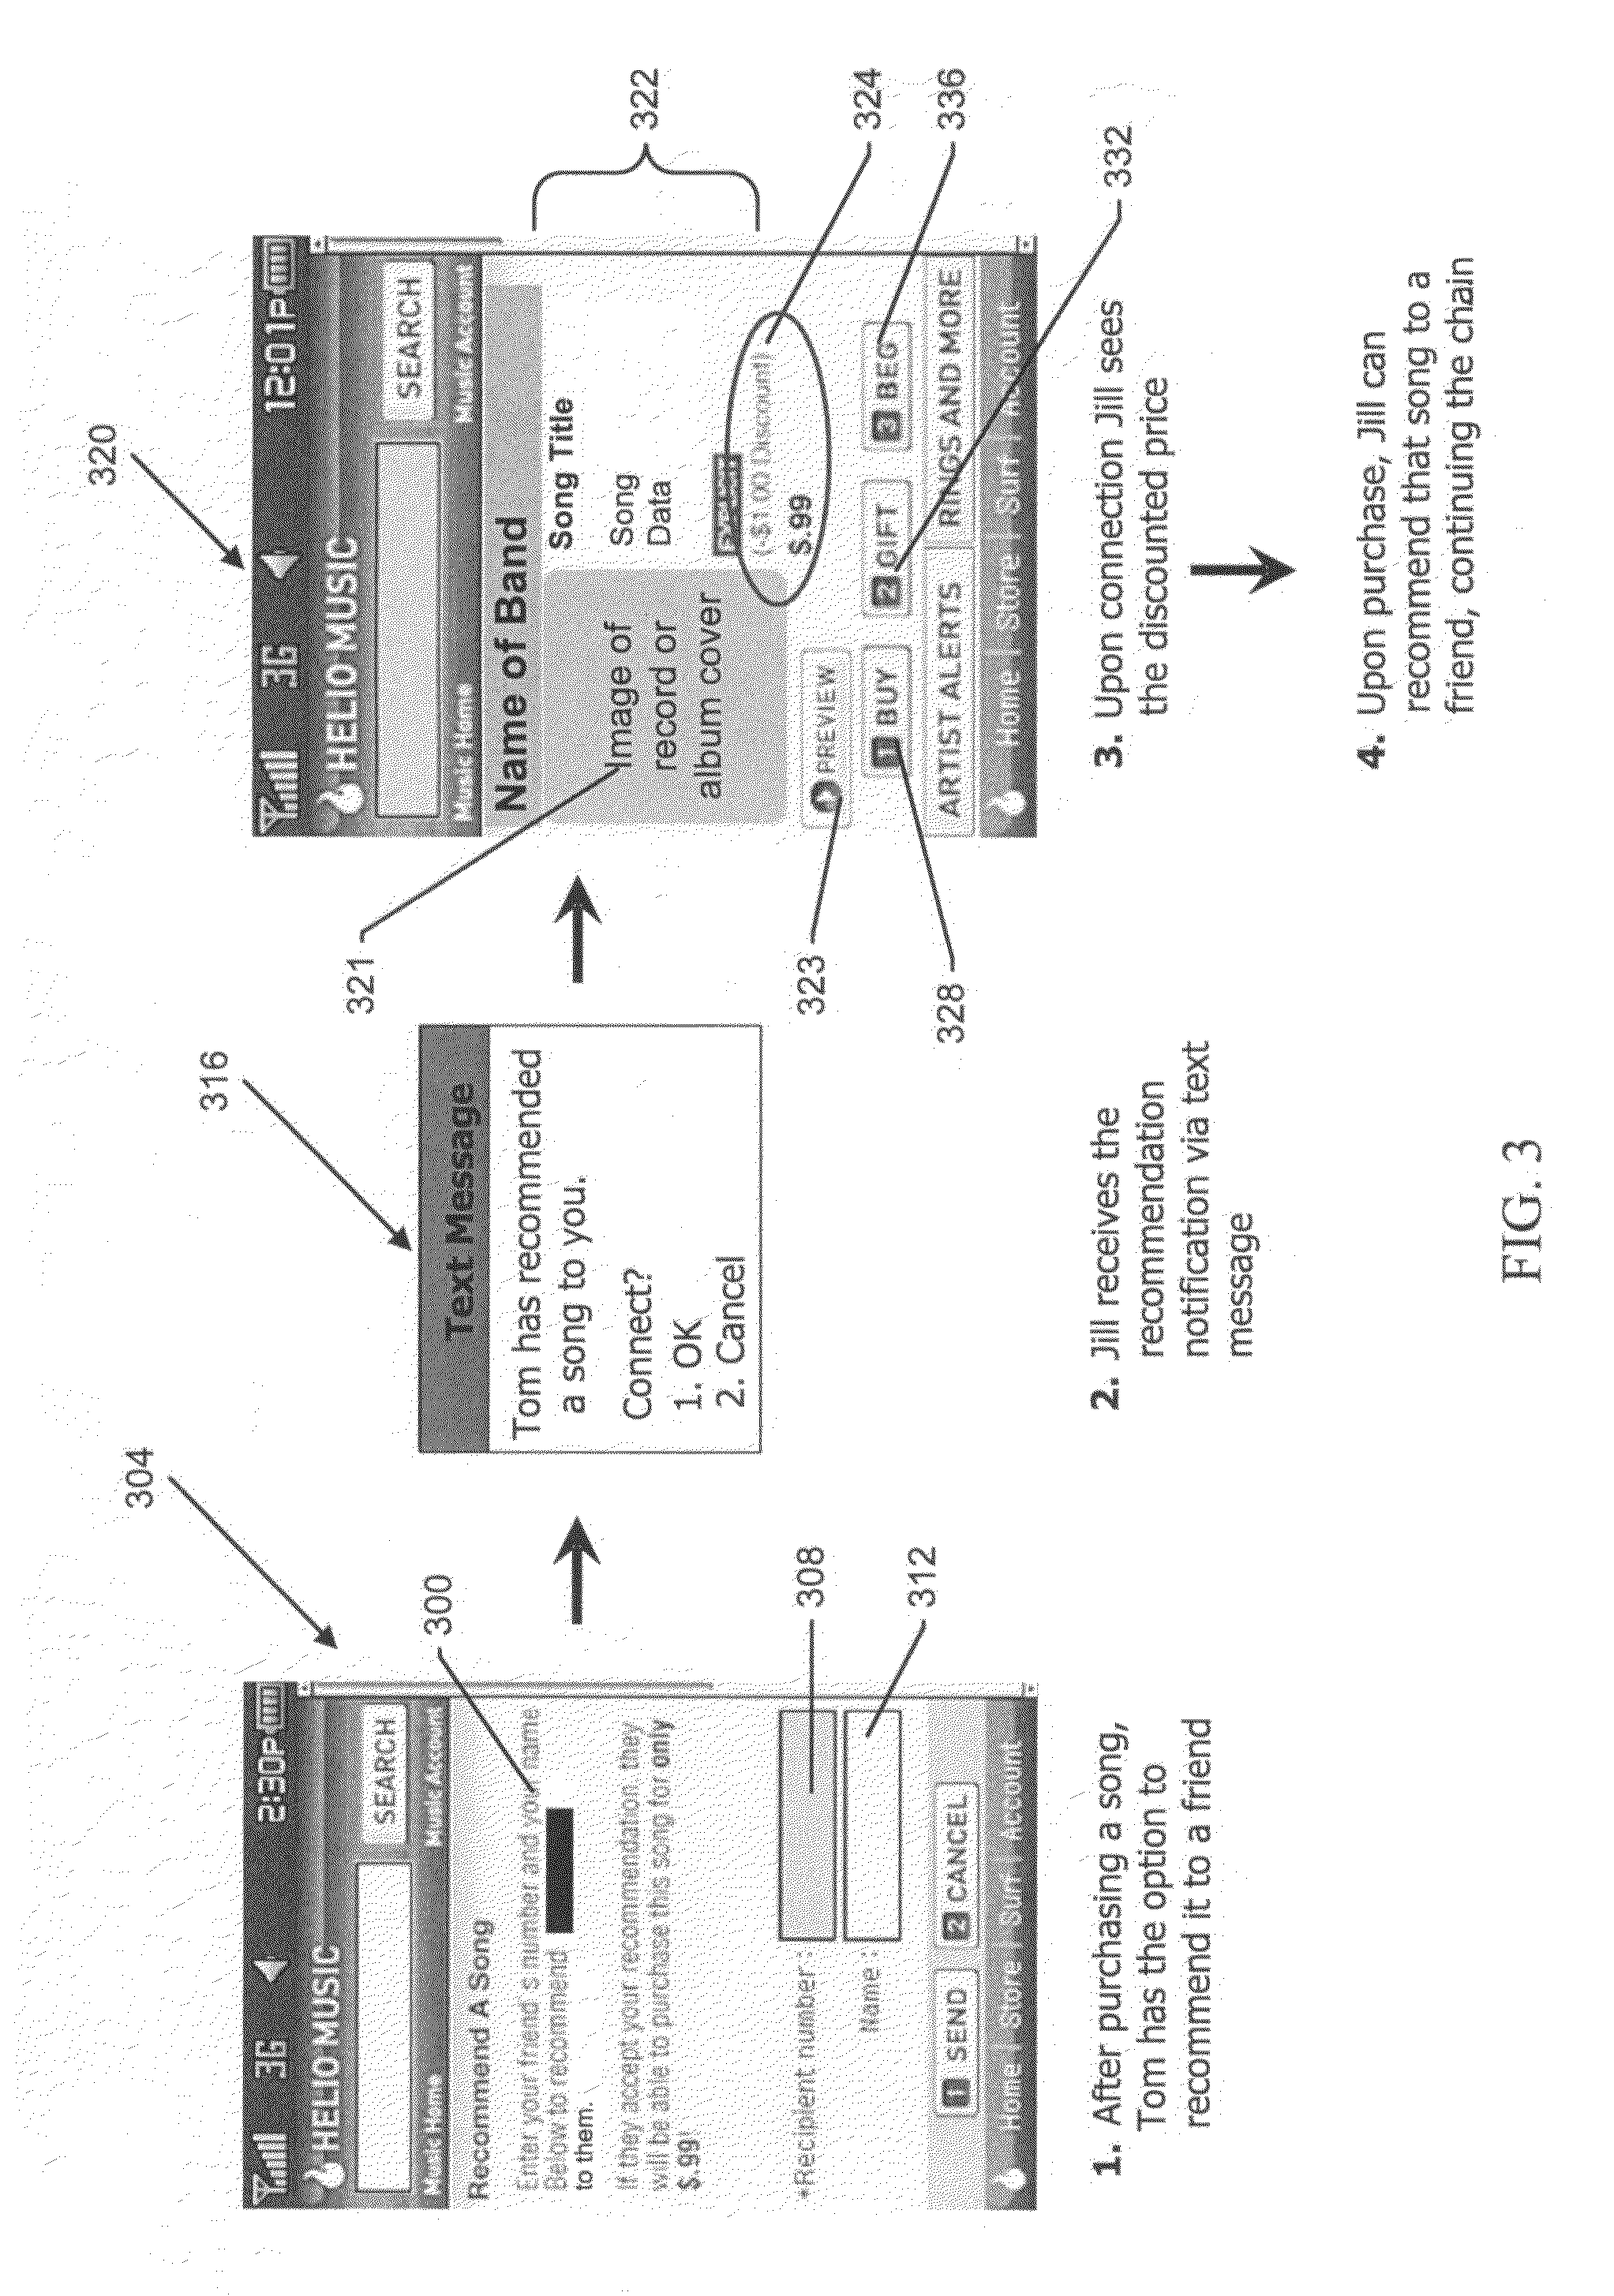 Apparatus, methods and systems for discounted referral and recommendation of electronic content